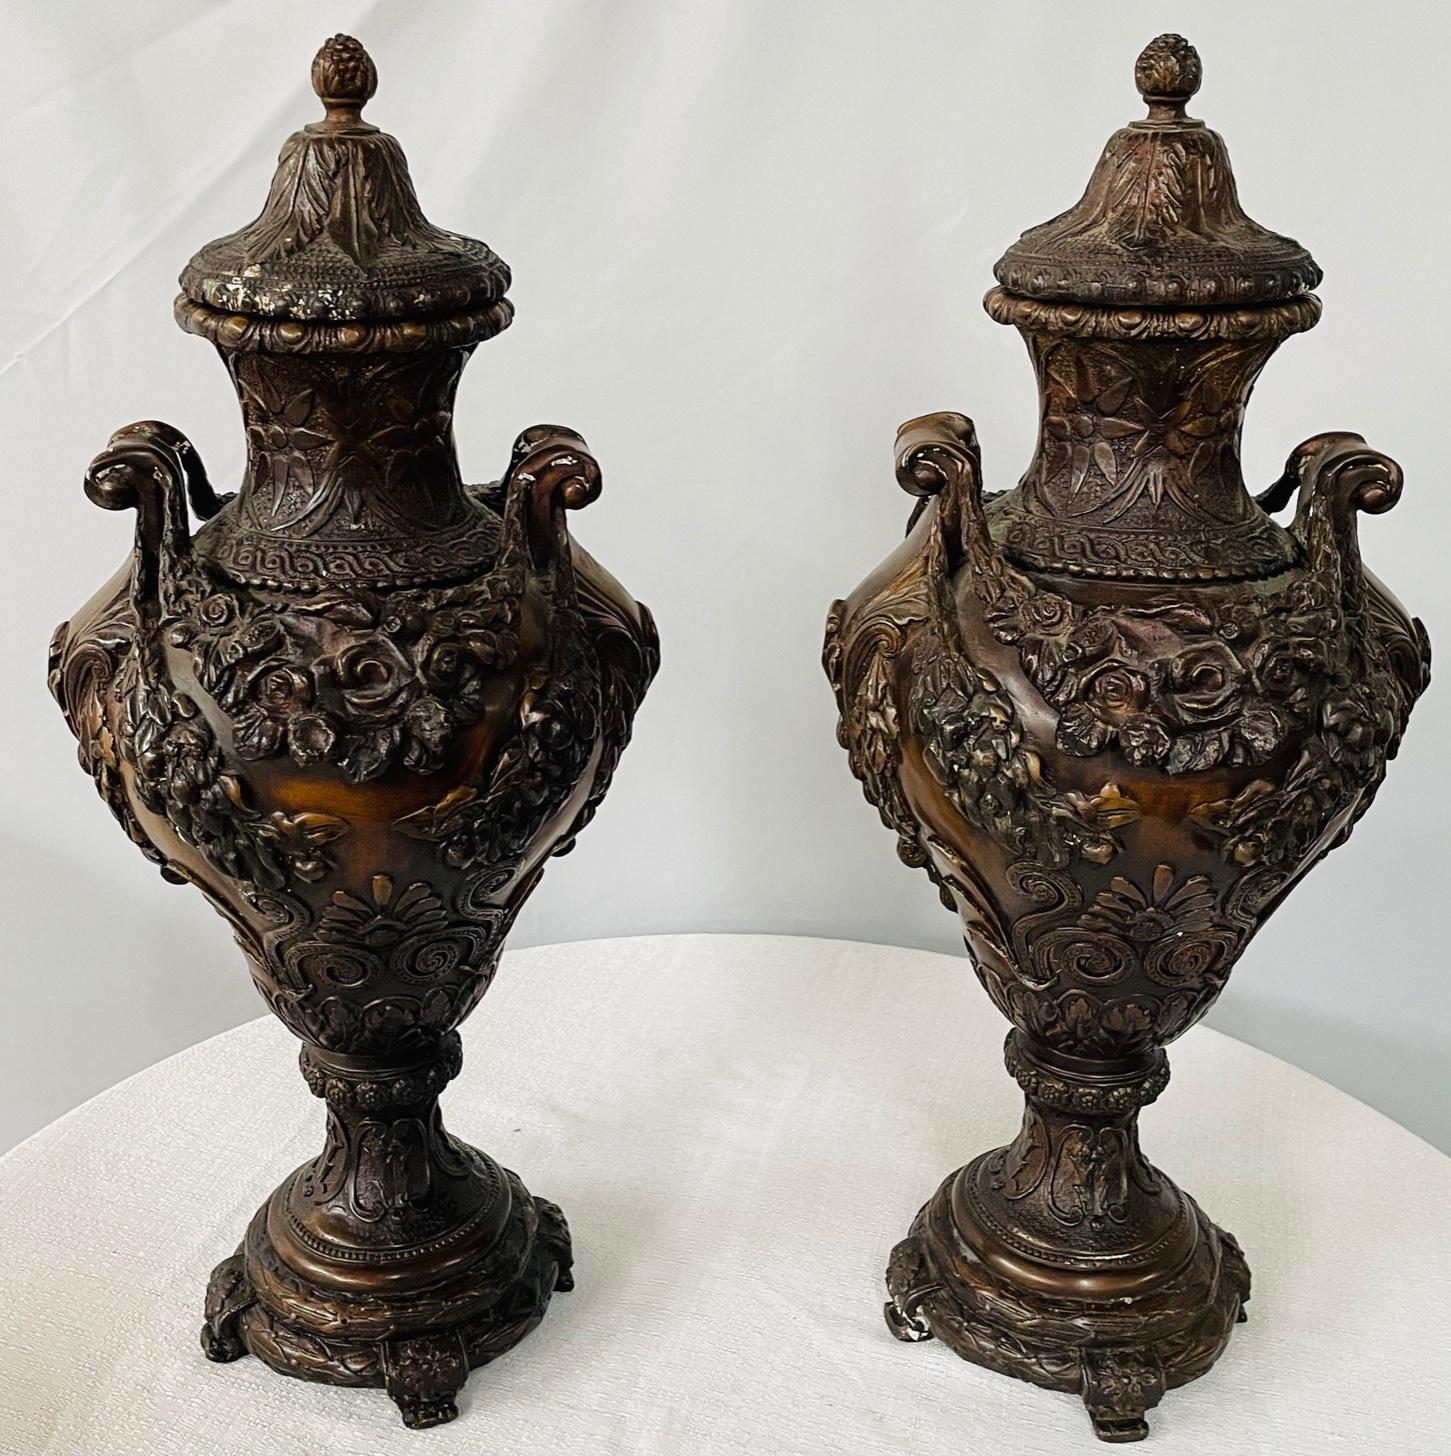 A pair of 19th century French patinated bronze urns featuring floral motifs. Throughout the pieces. The urns can be used as painters by removing the final cap. In a patinated finish, the pair of bronze urns will add sophistication and elegance to